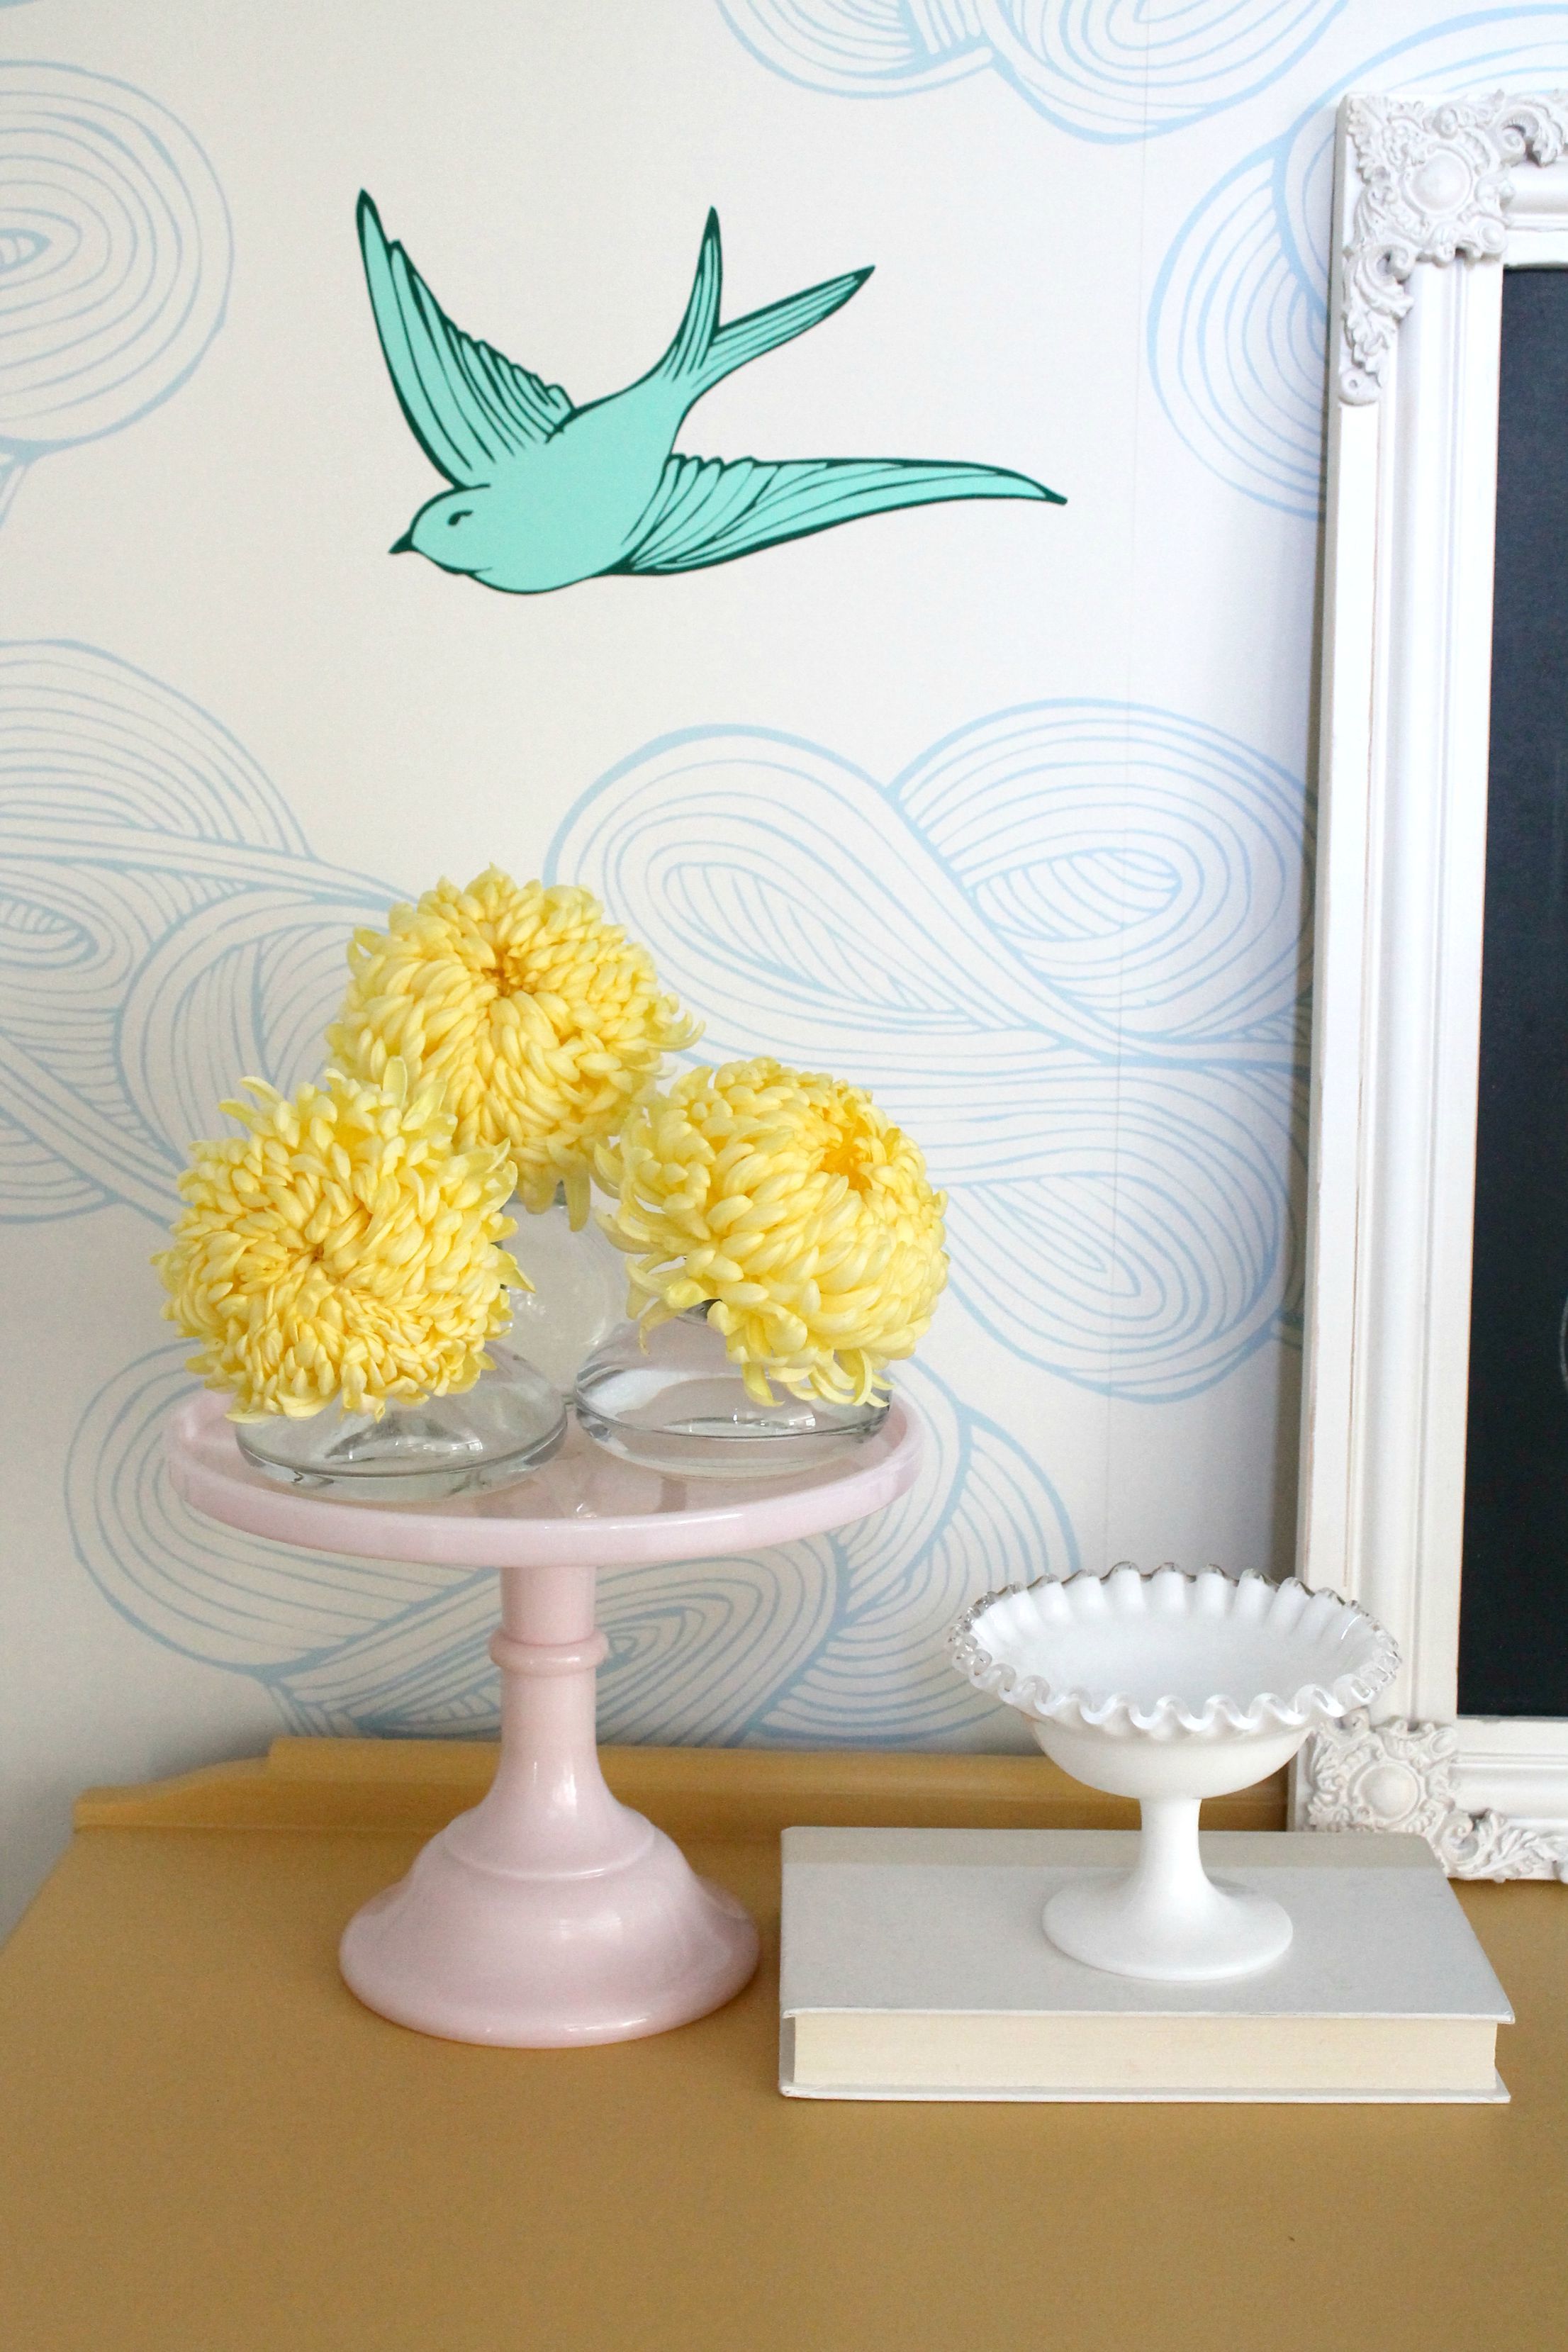 Cheery nook with wallpaper, bud vases, cake plate and ruffled bowl